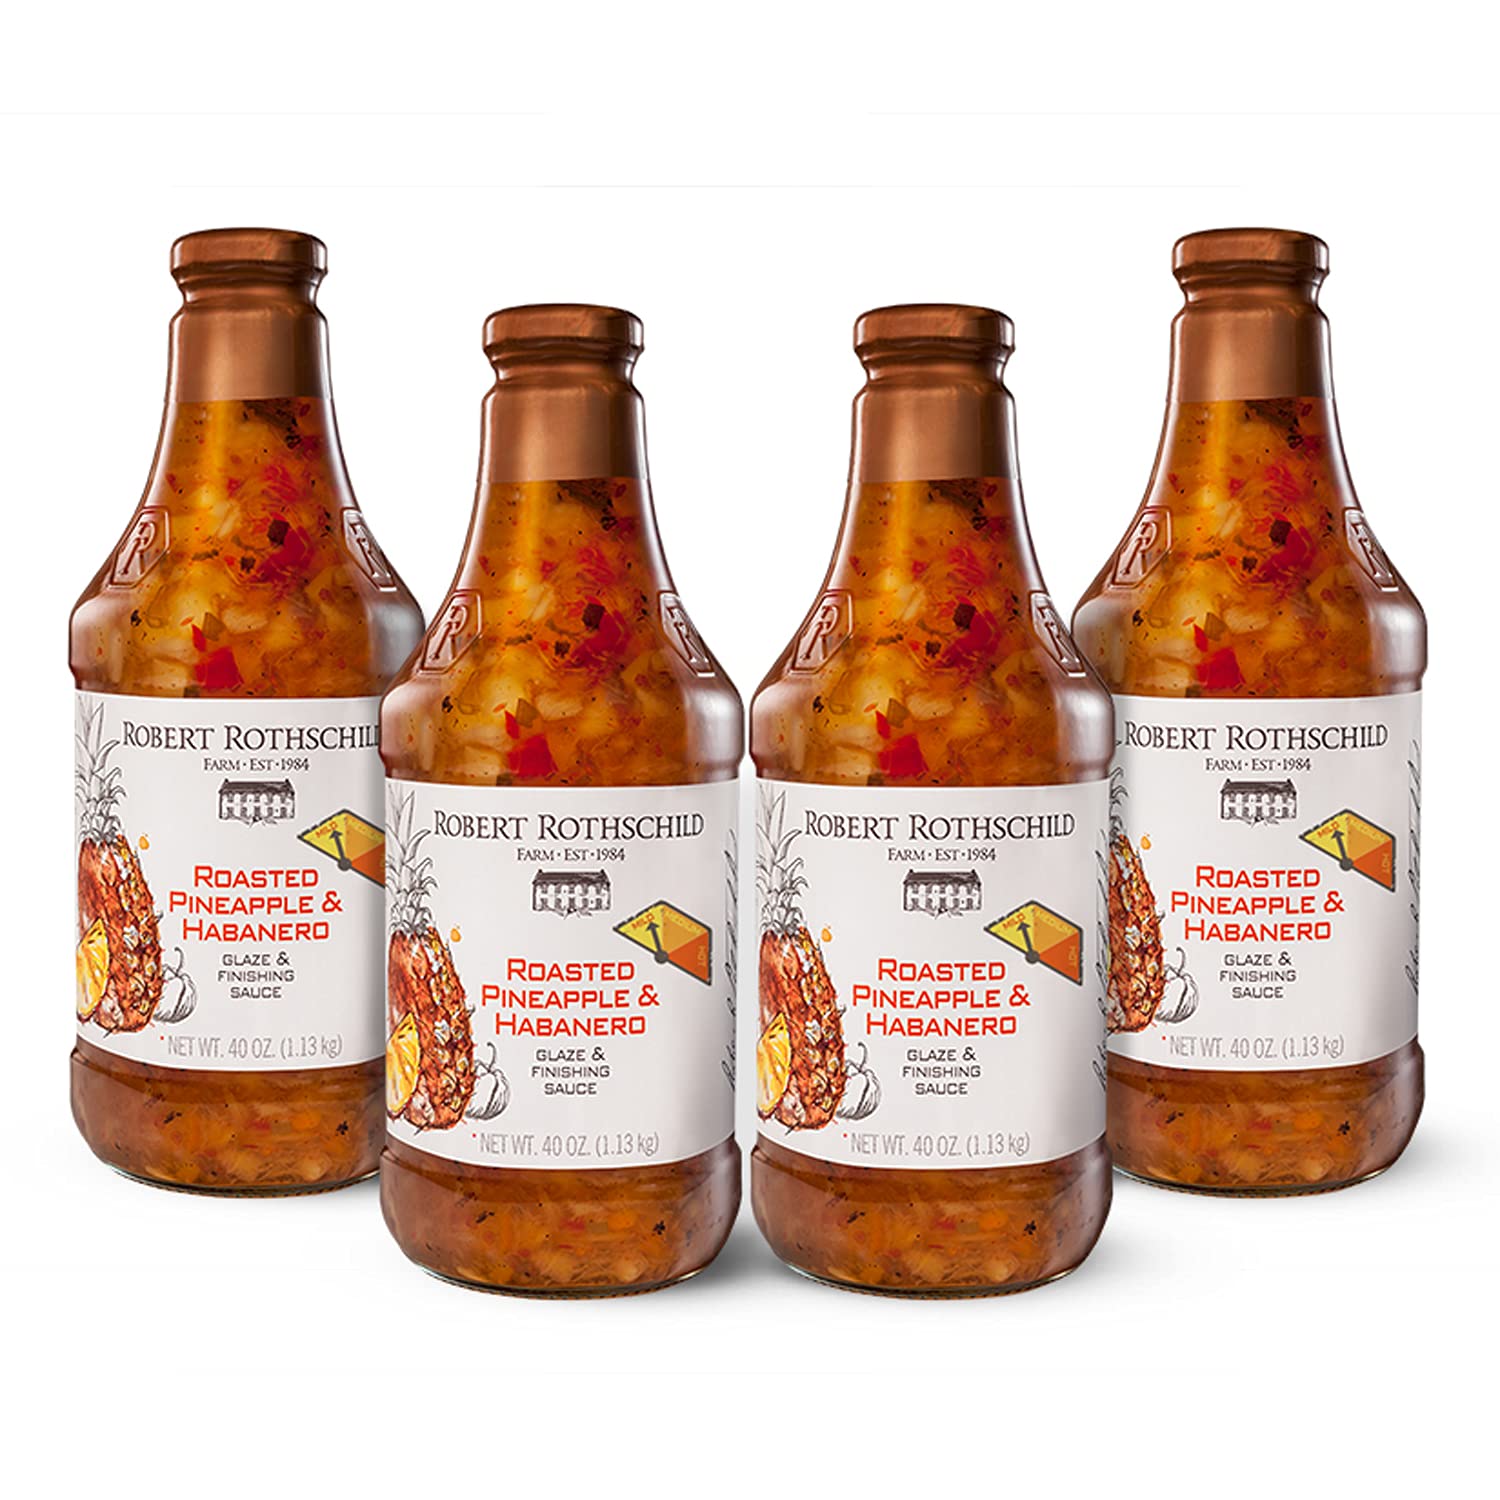 Robert Rothschild Farm Roasted Pineapple & Habanero Gourmet Glaze and Finishing Sauce – Sweet and Spicy Marinade, Glaze or Dip – 40 Oz (Pack of 4)